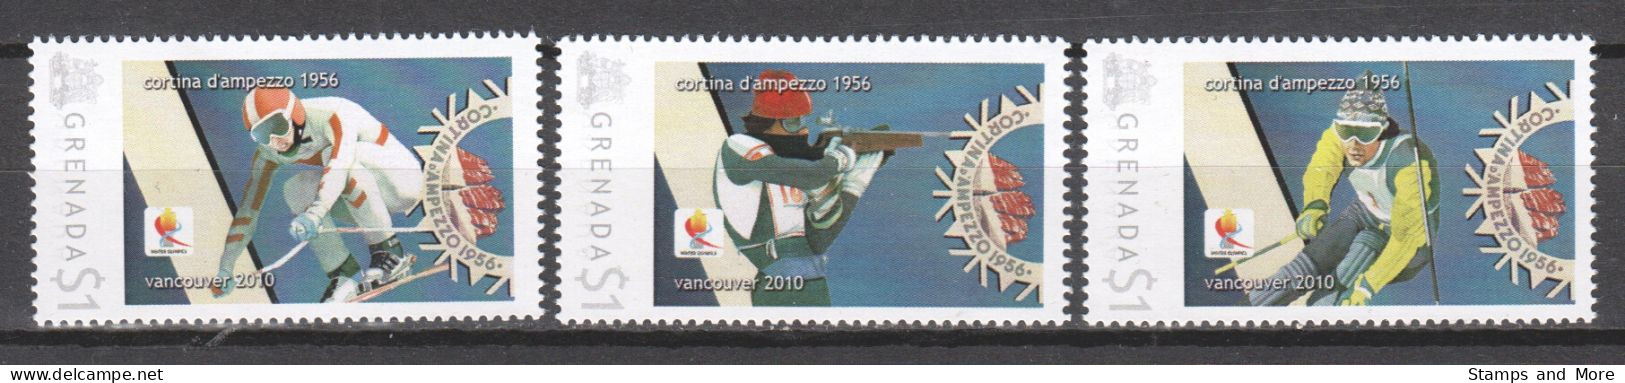 Grenada - Limited Edition Serie 07 MNH - WINTER OLYMPICS VANCOUVER 2010 - CORTINA D'AMPEZZO 1956 (2)(*) - Winter 2010: Vancouver